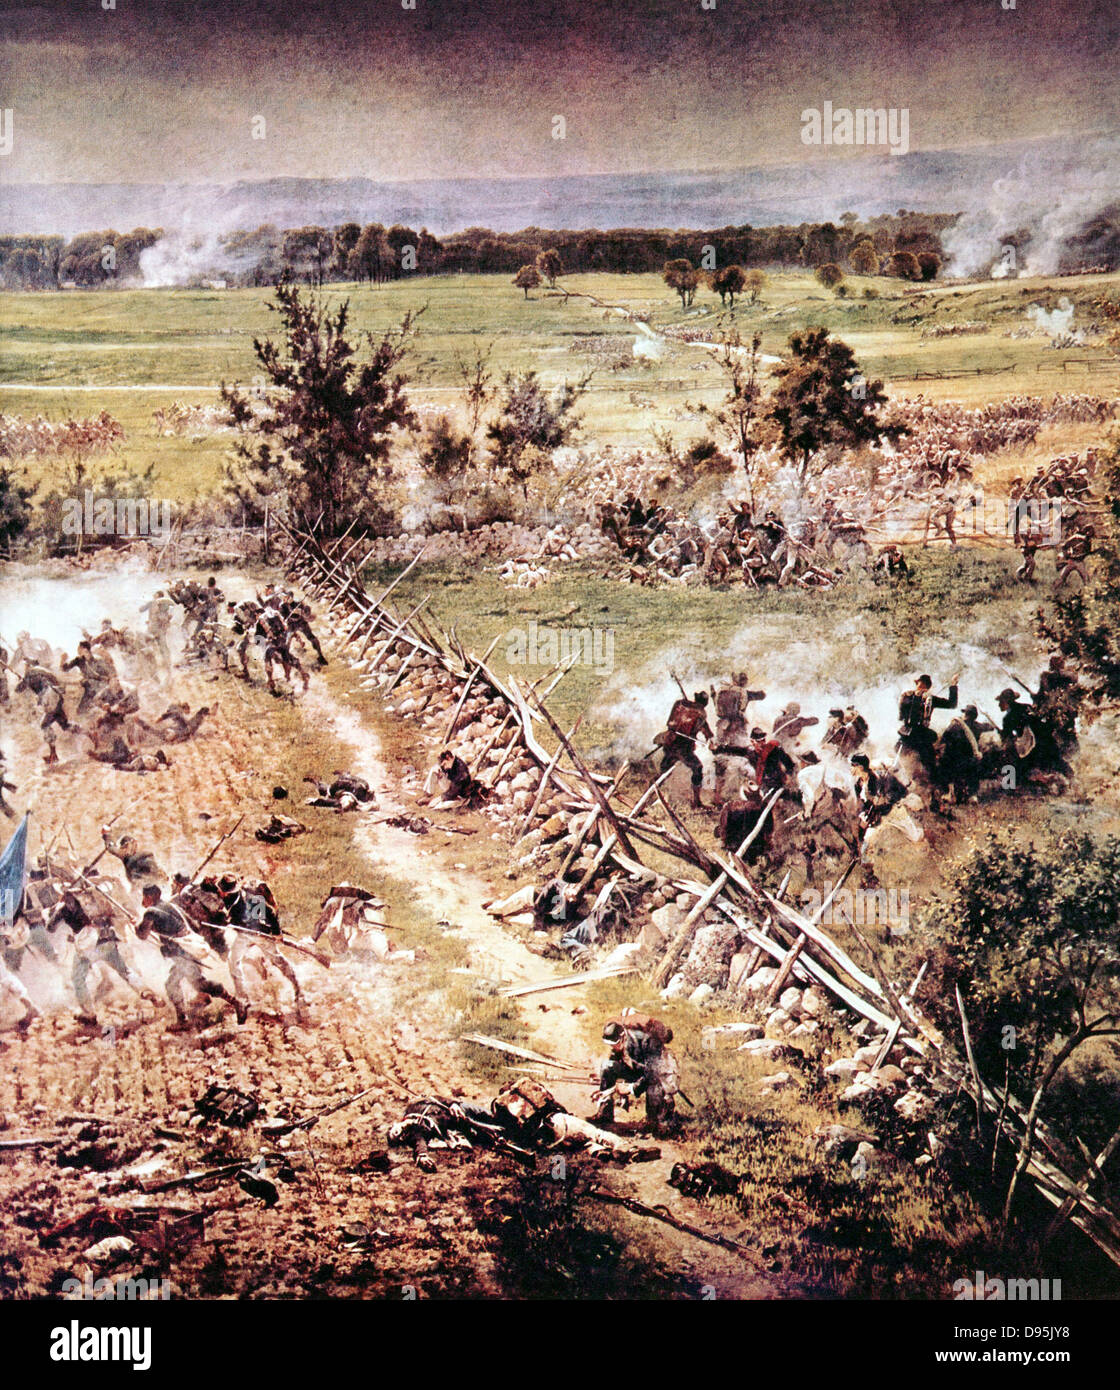 American Civil War - Battle of Gettysburg 1-3 July 1863. Heavy losses on both sides, 43,000 in all. Stock Photo